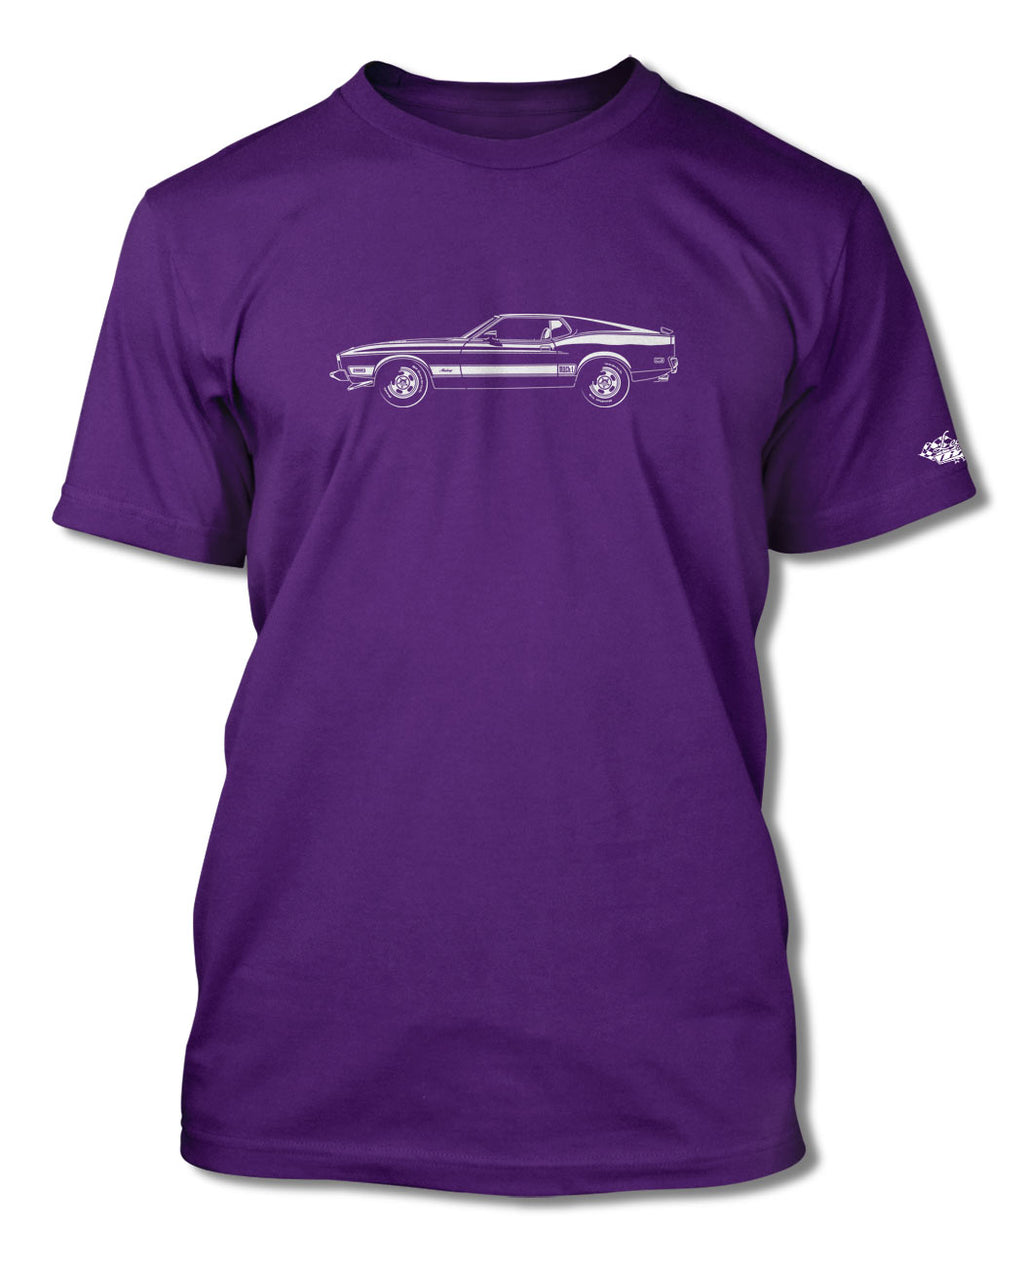 1973 Ford Mustang Mach 1 with Stripes Sportsroof T-Shirt - Men - Side View